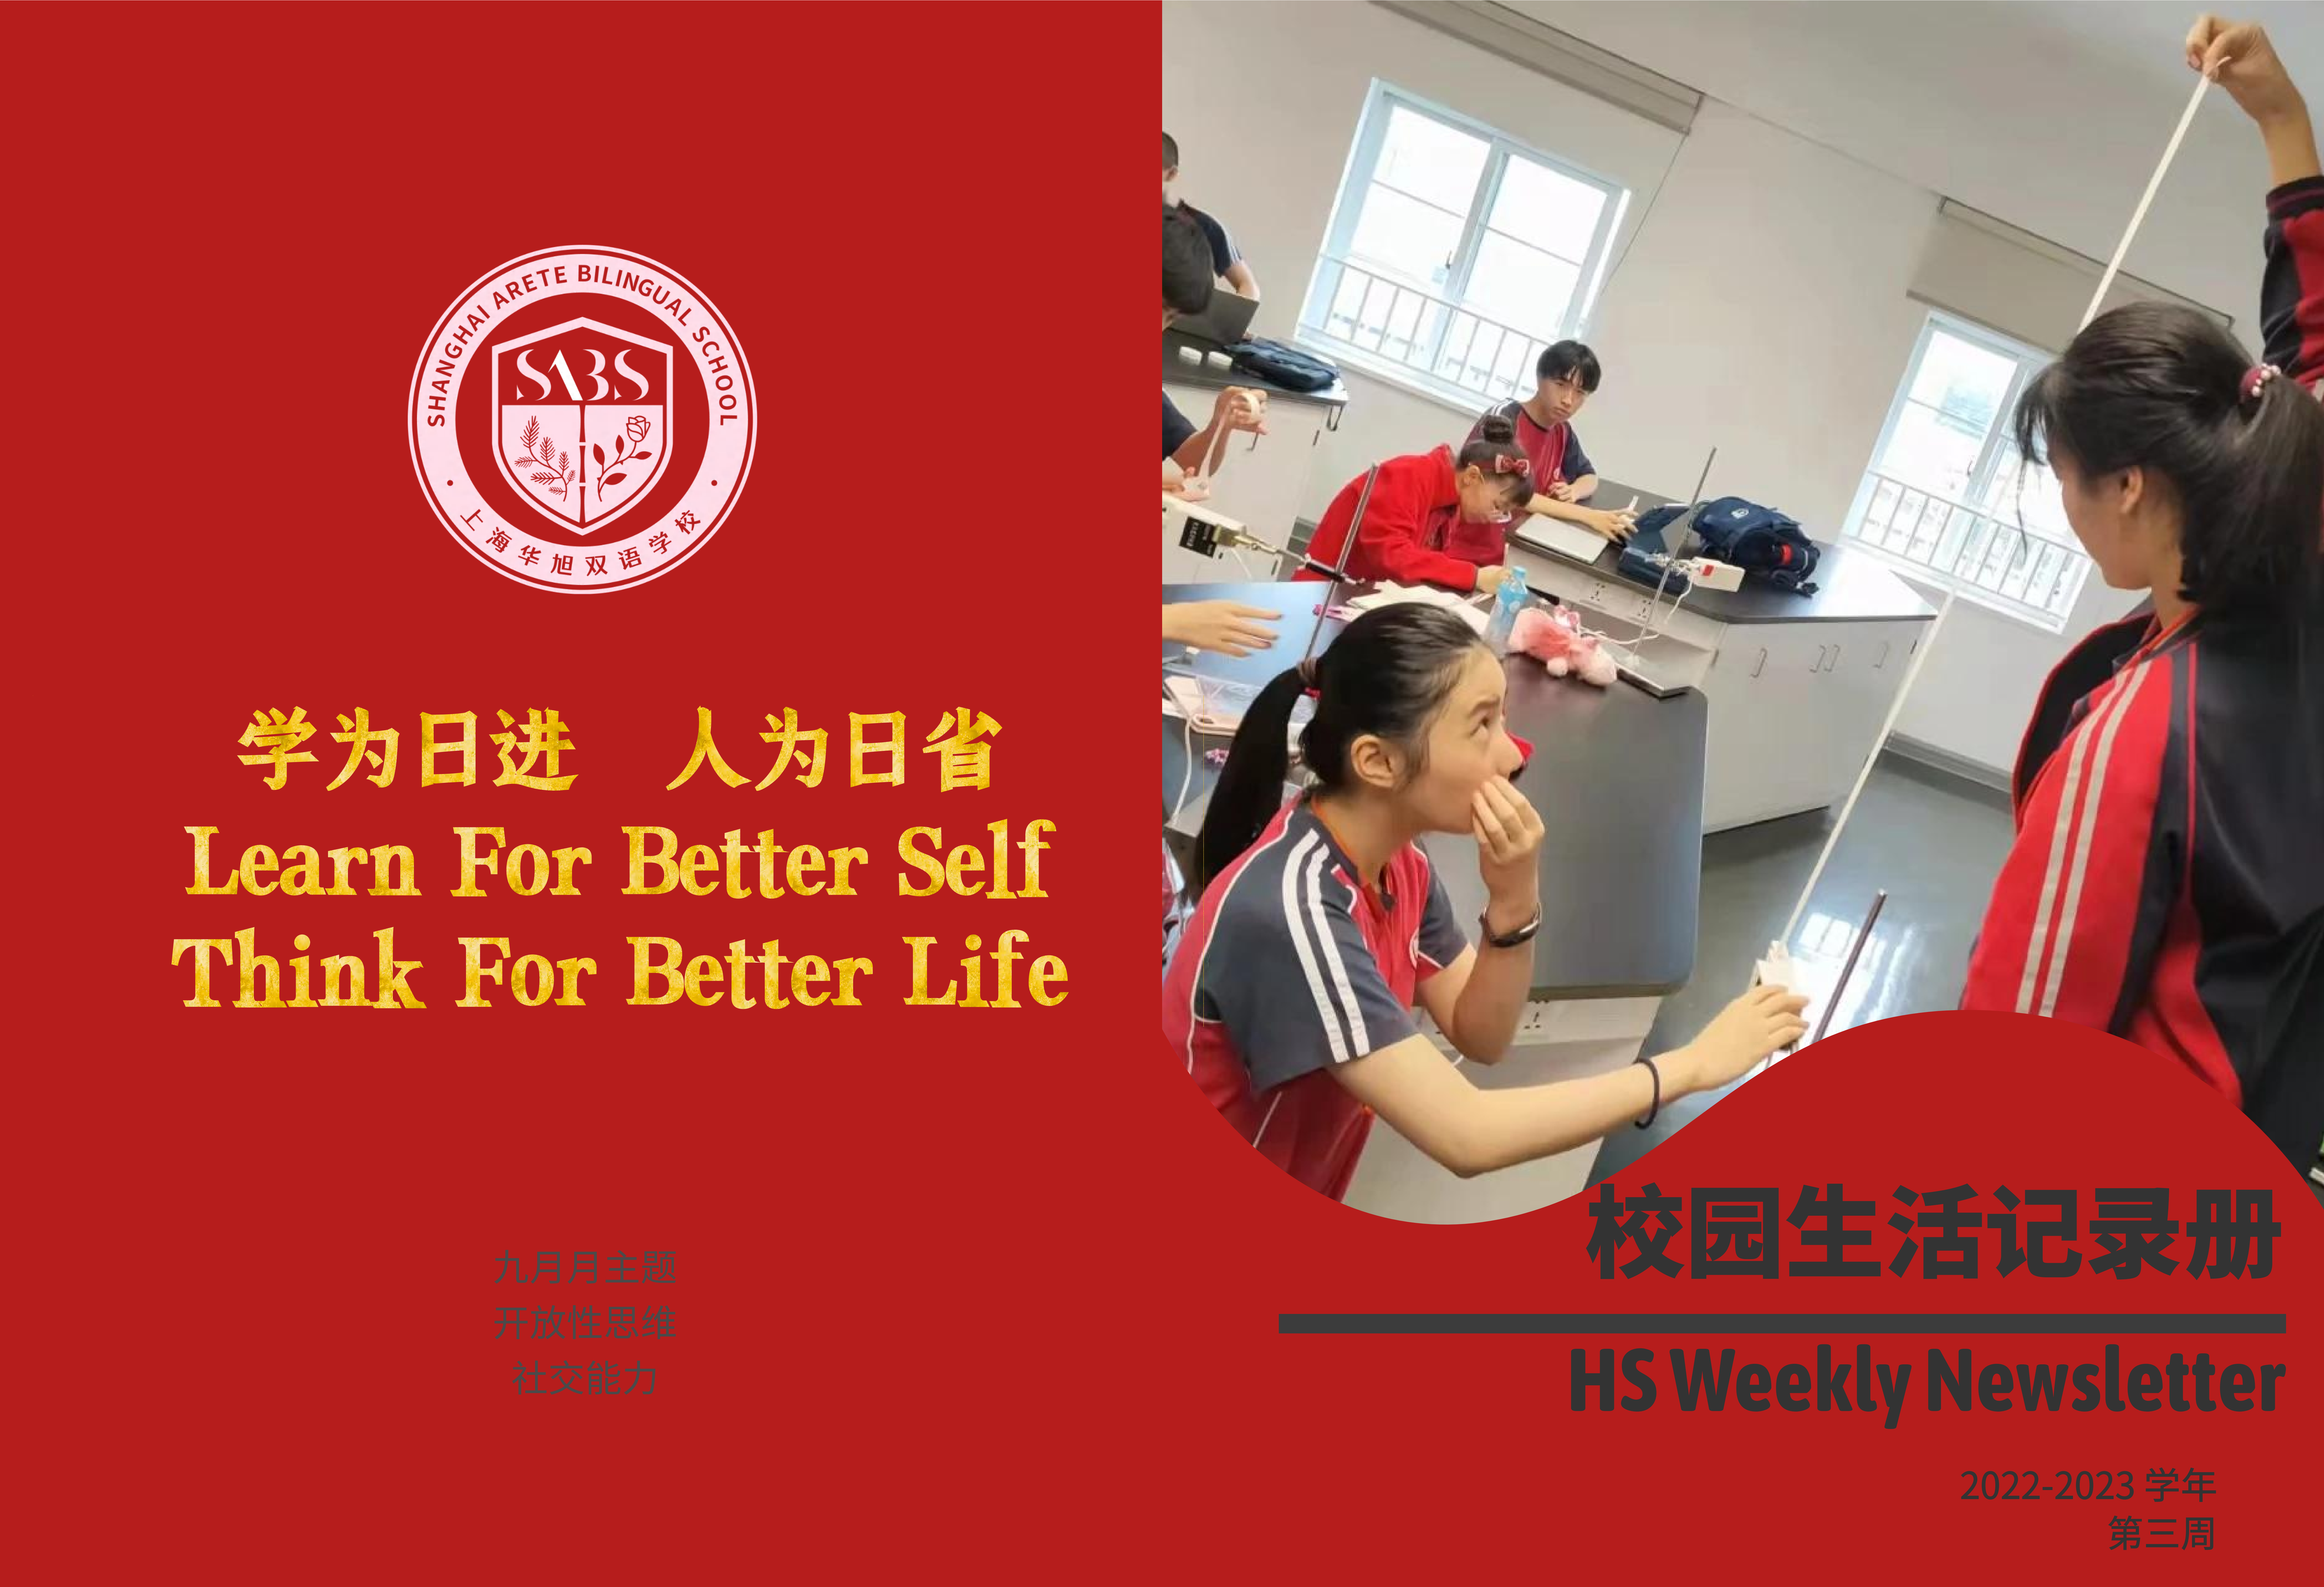 HS 3rd Week Newsletter (Chinese 2022-2023 1st semester)_00.png